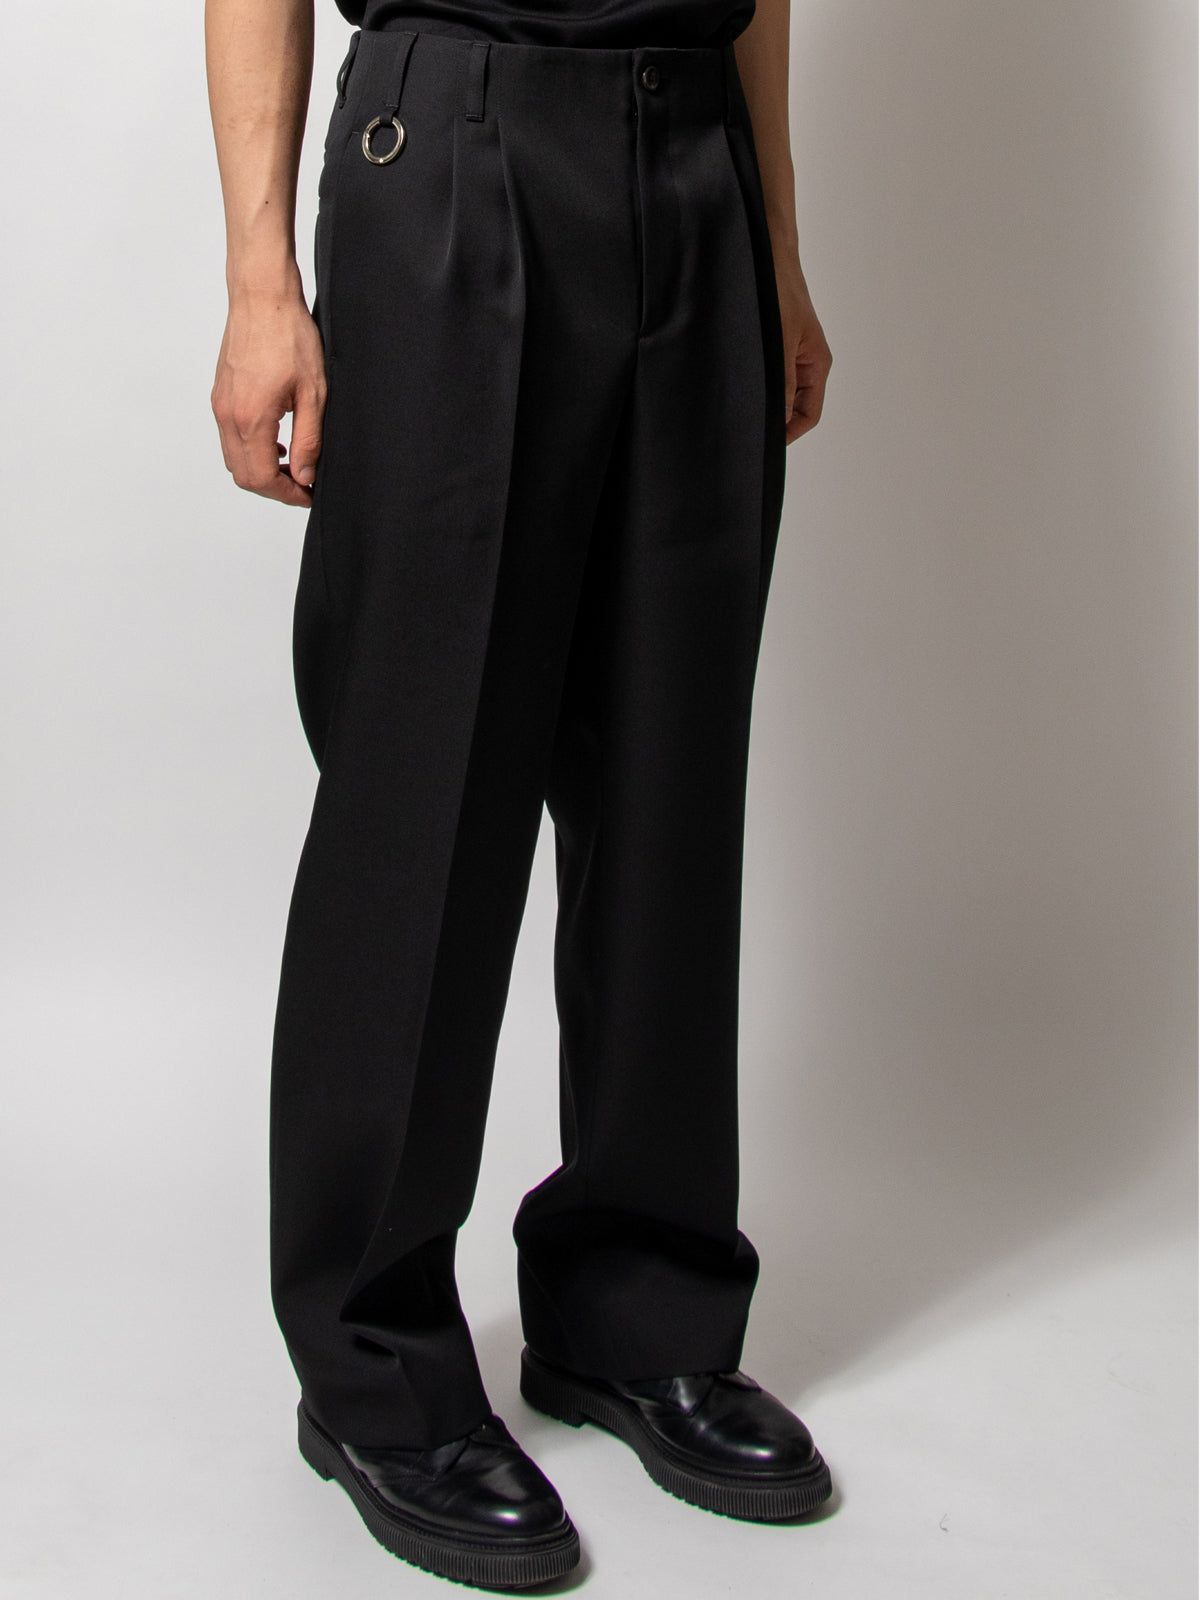 QUINN / Wide Tailored Pants (BLK)